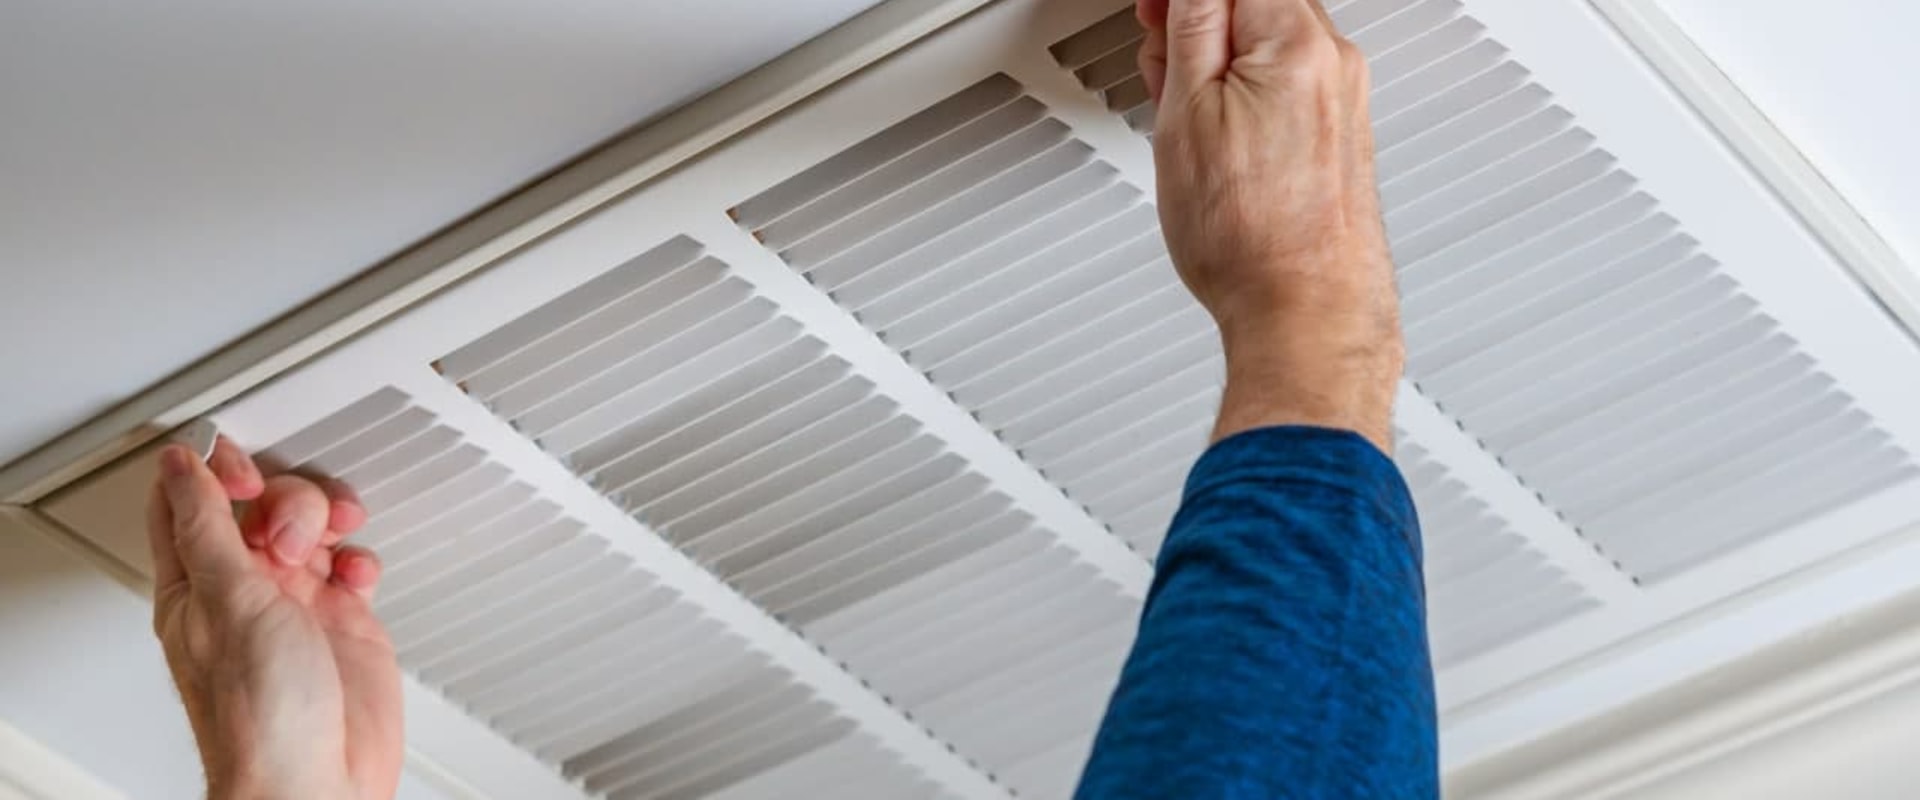 Can I Use a 20x25x1 Air Filter in My Window AC Unit?